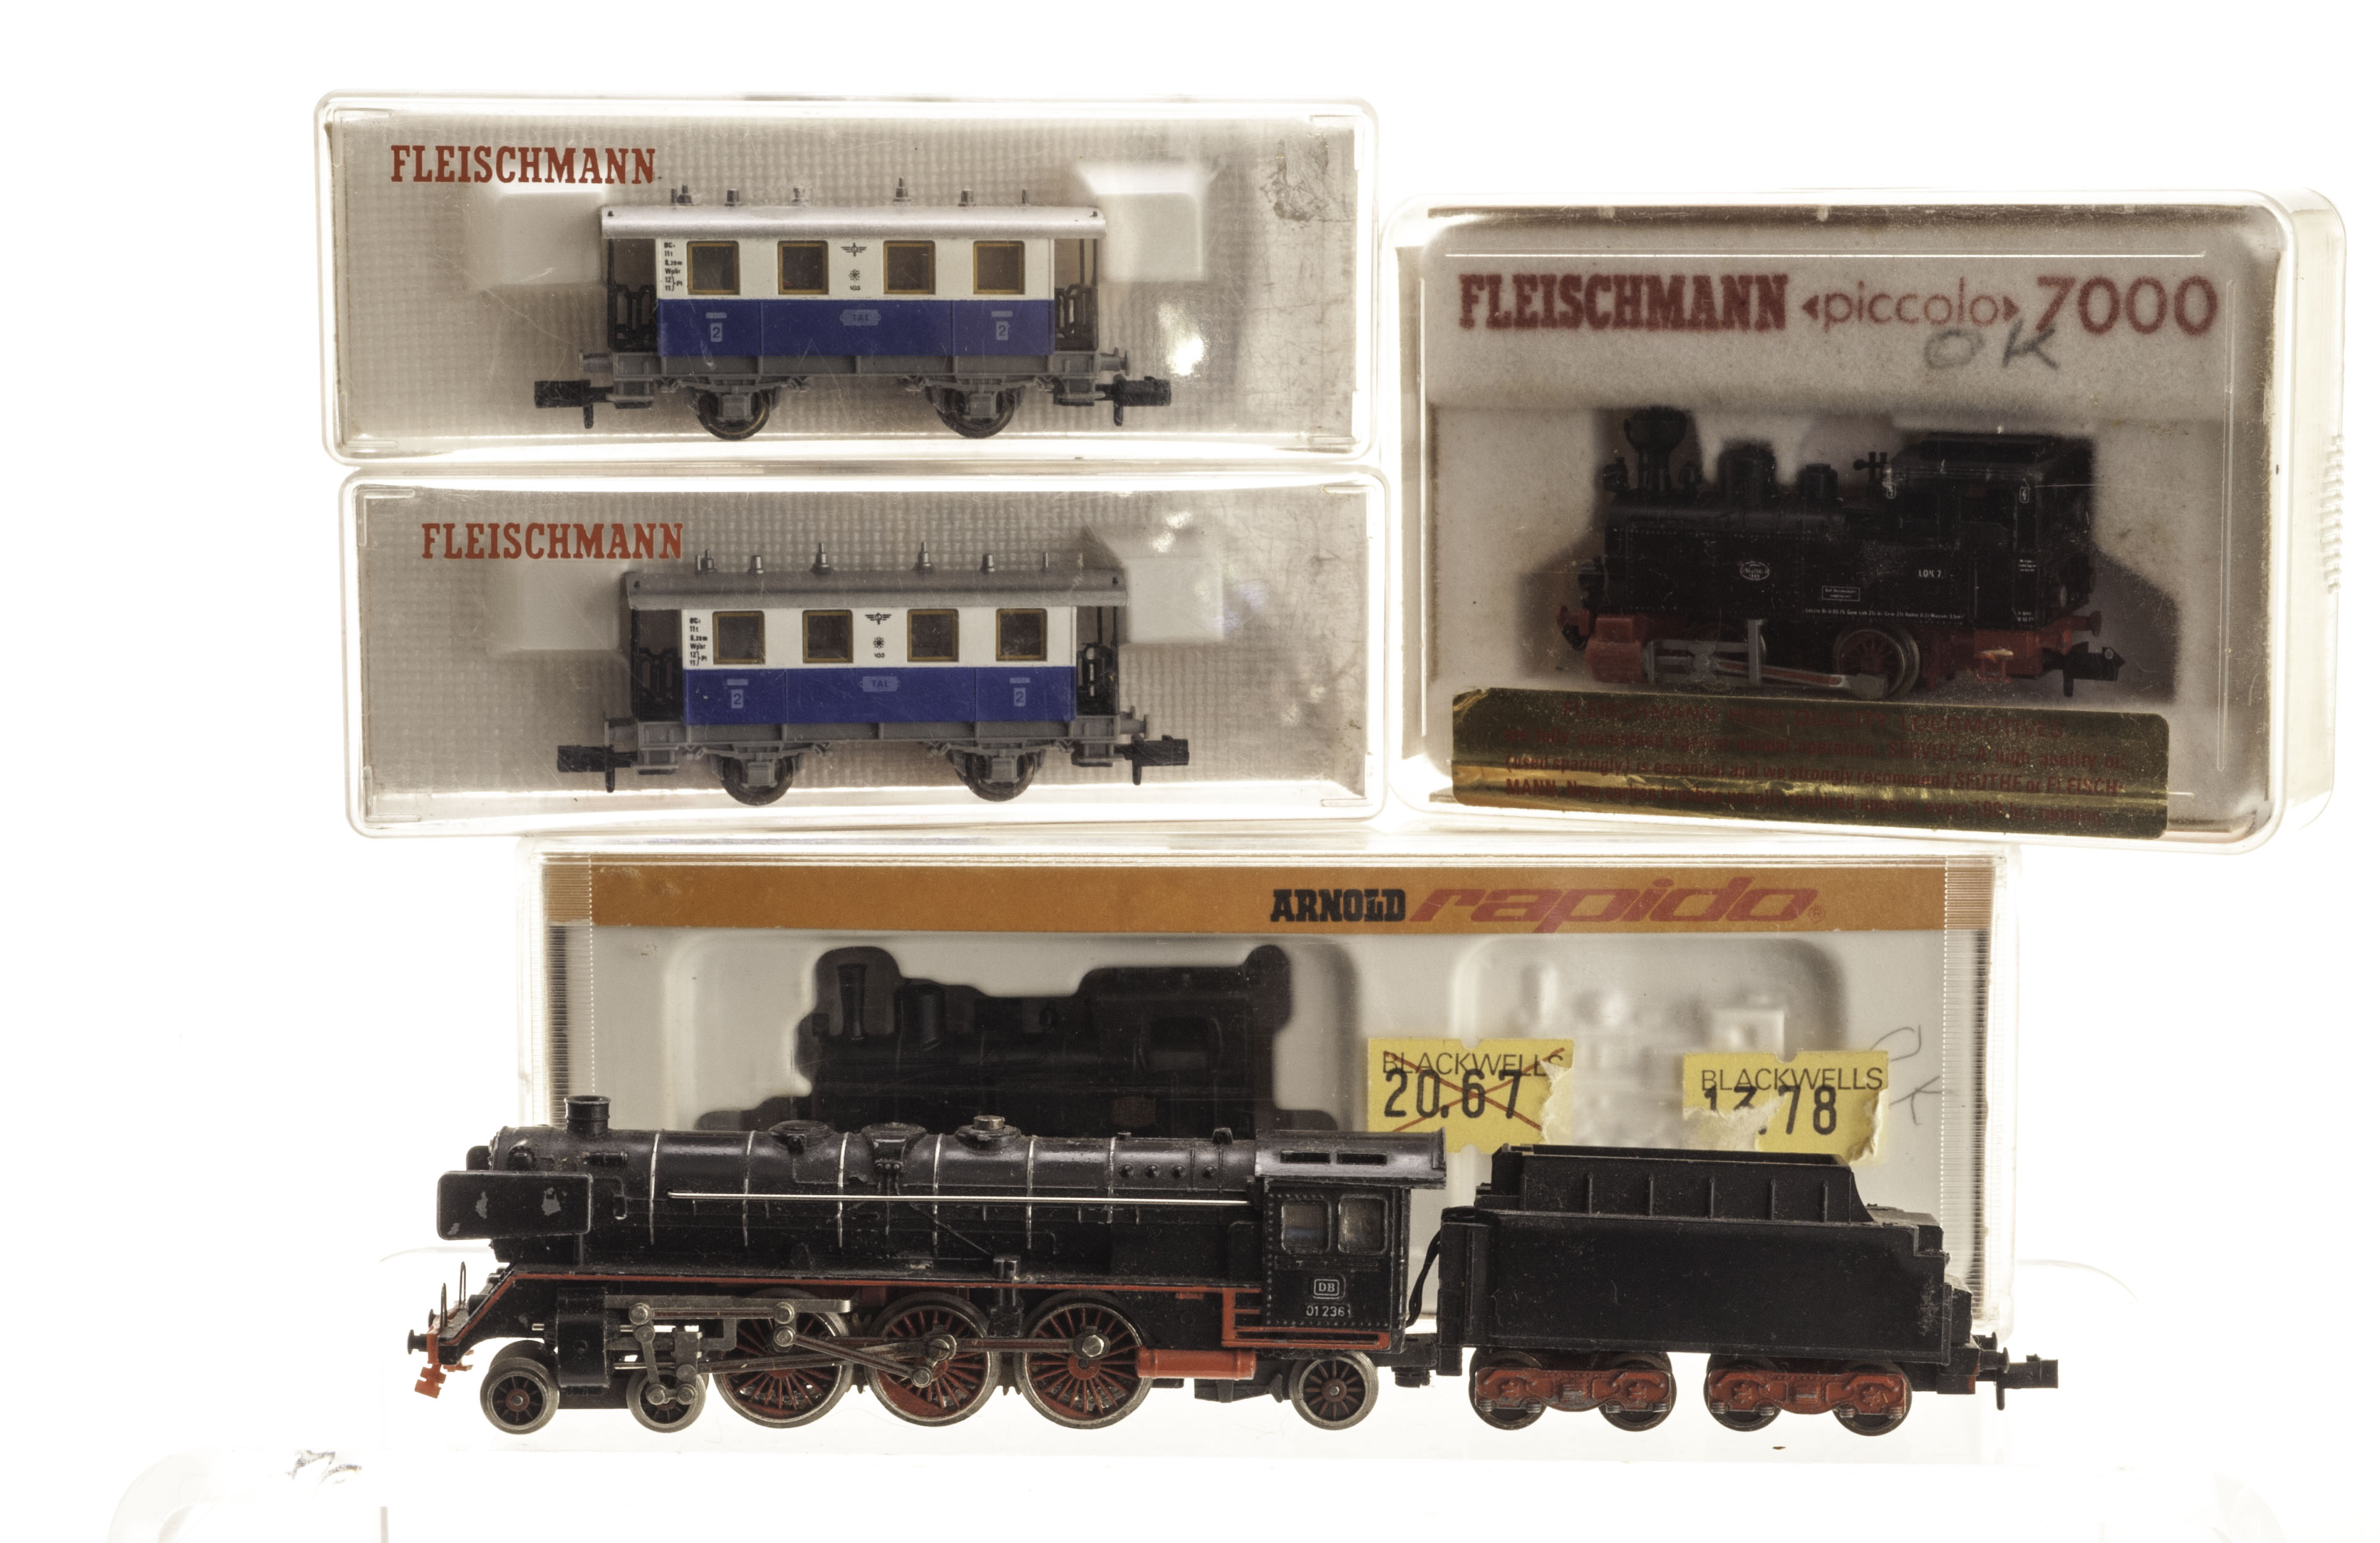 Continental N Gauge Locomotives and Rolling stock by various makers: Fleischmann Piccolo 7000 DB